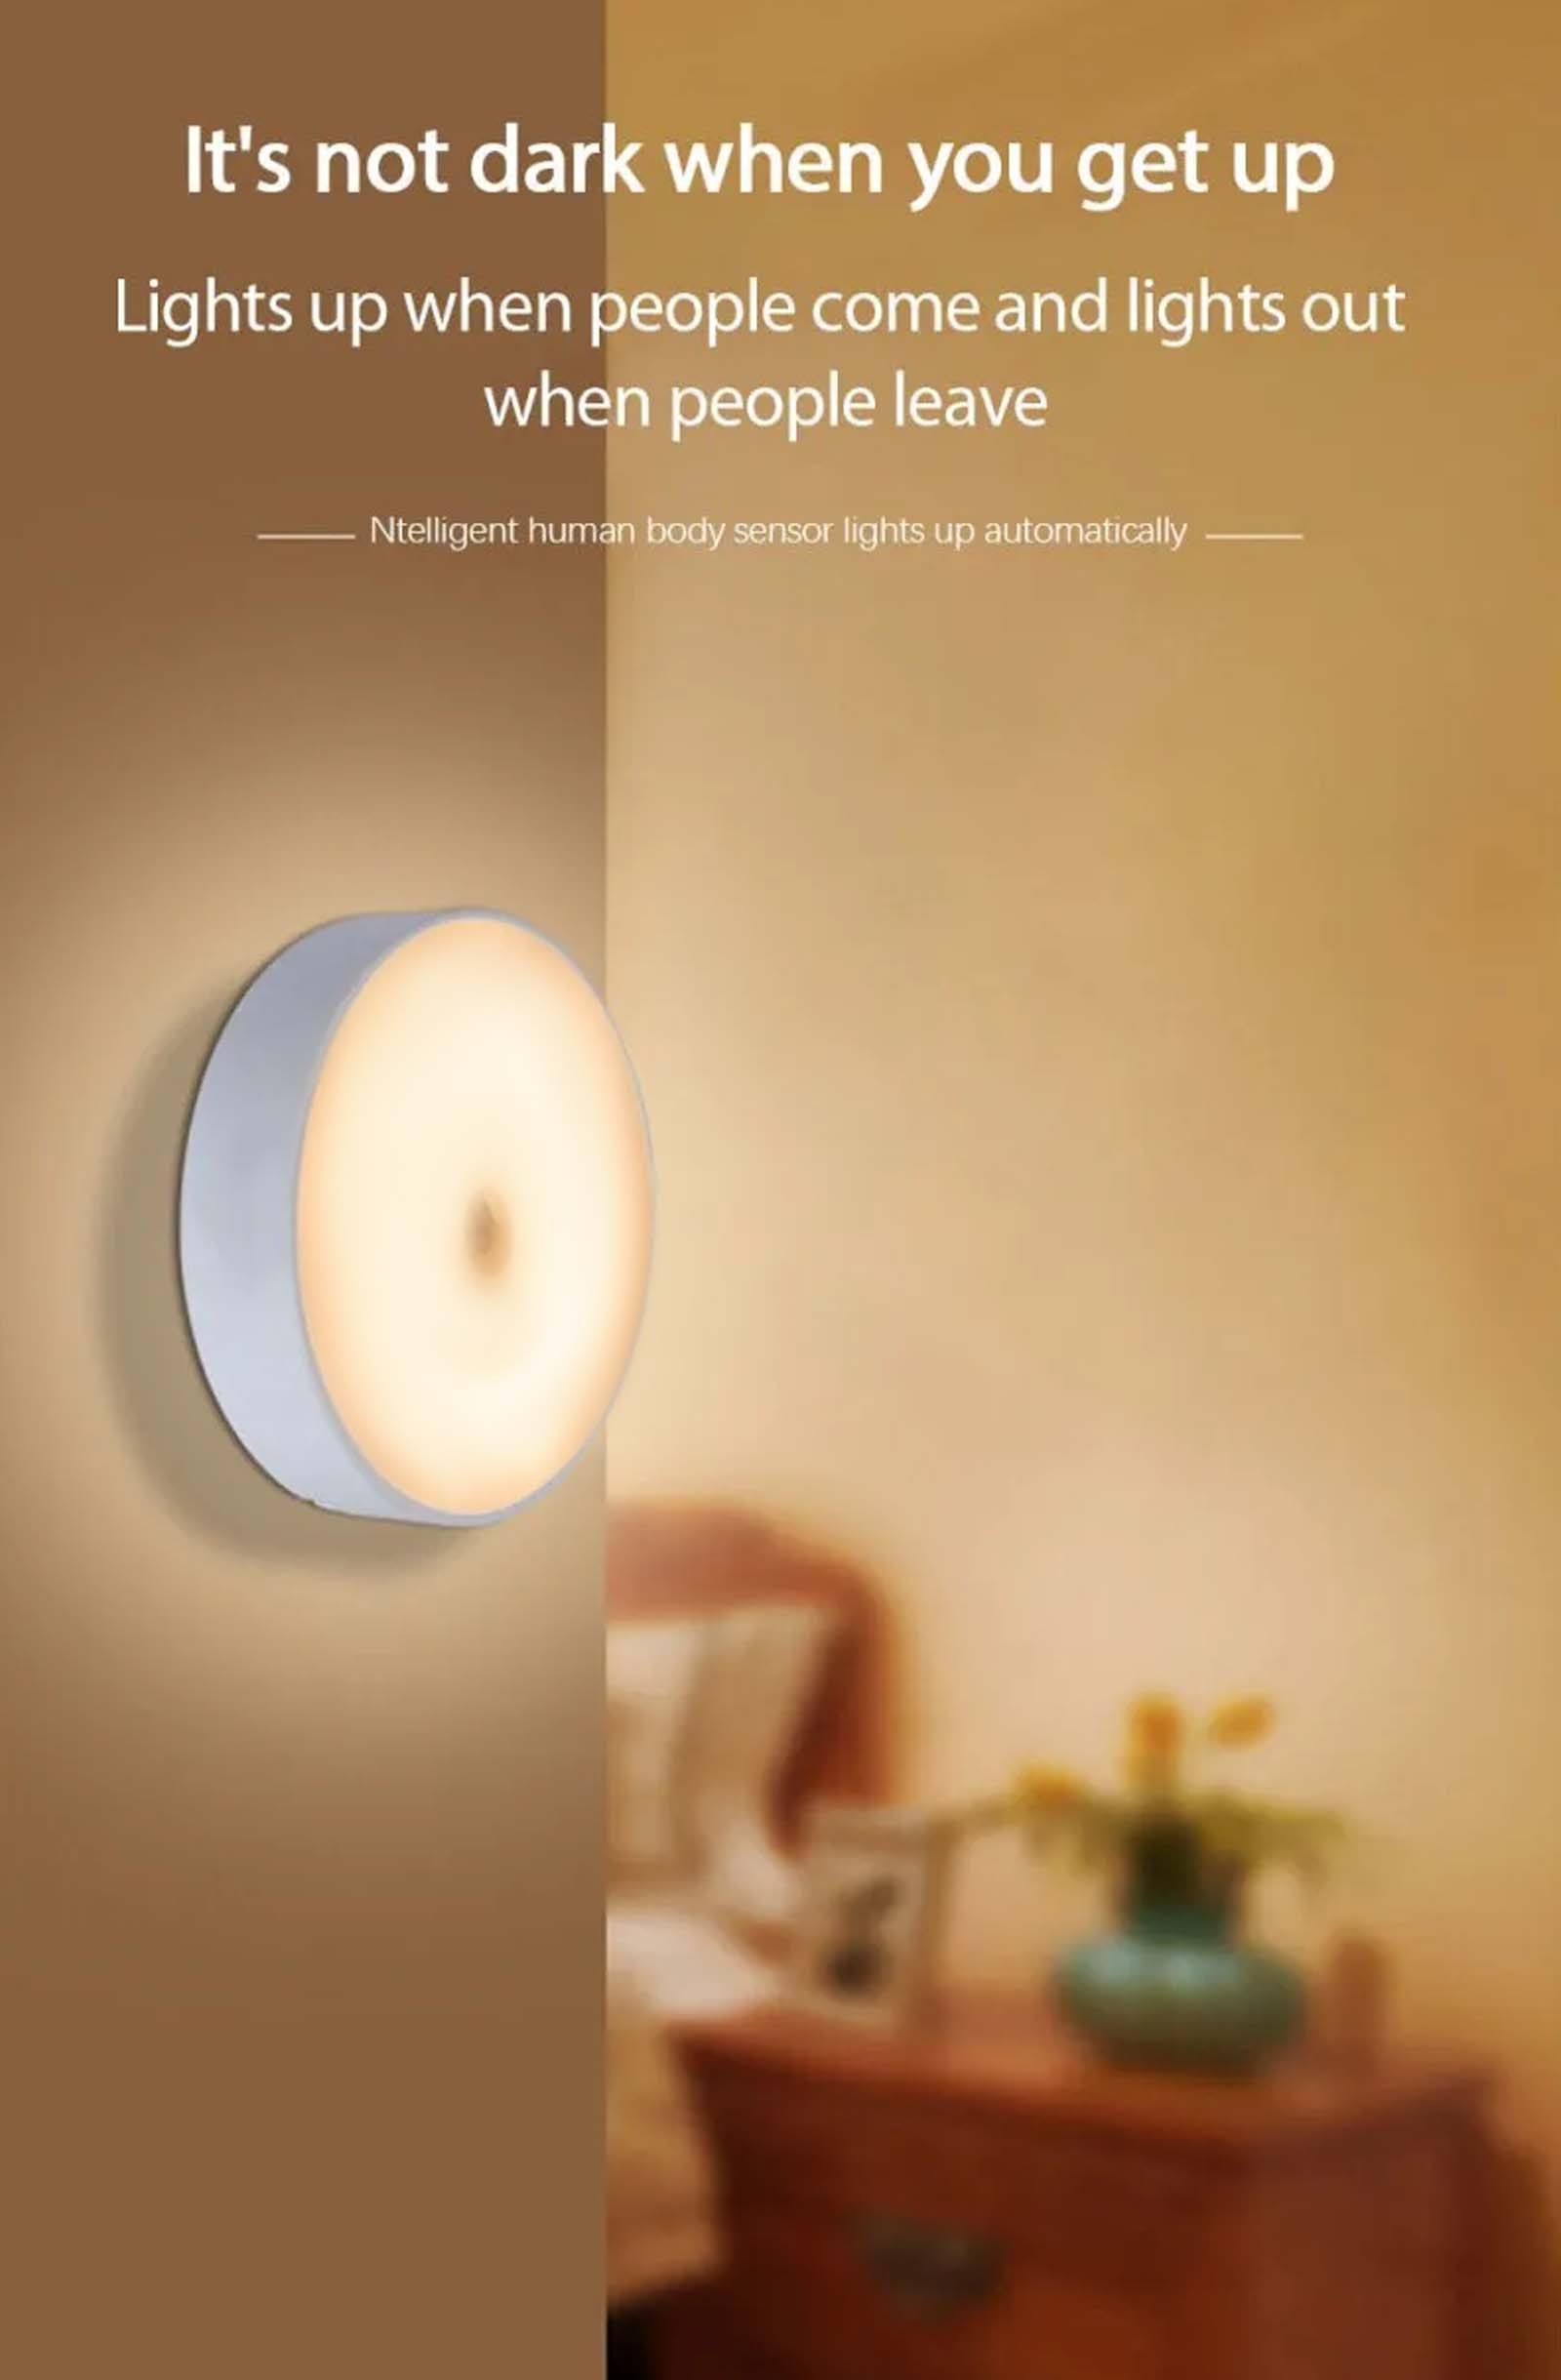 8-LED USB Rechargeable Night Light,Body Induction Lamp,3 Working Modes,Smart Wall Light With Stick-On Magnetic Strip For Homes, Bathroom, Bedroom, Kitchen, Hallways, Cars, Garages And Corridor Decor details 0